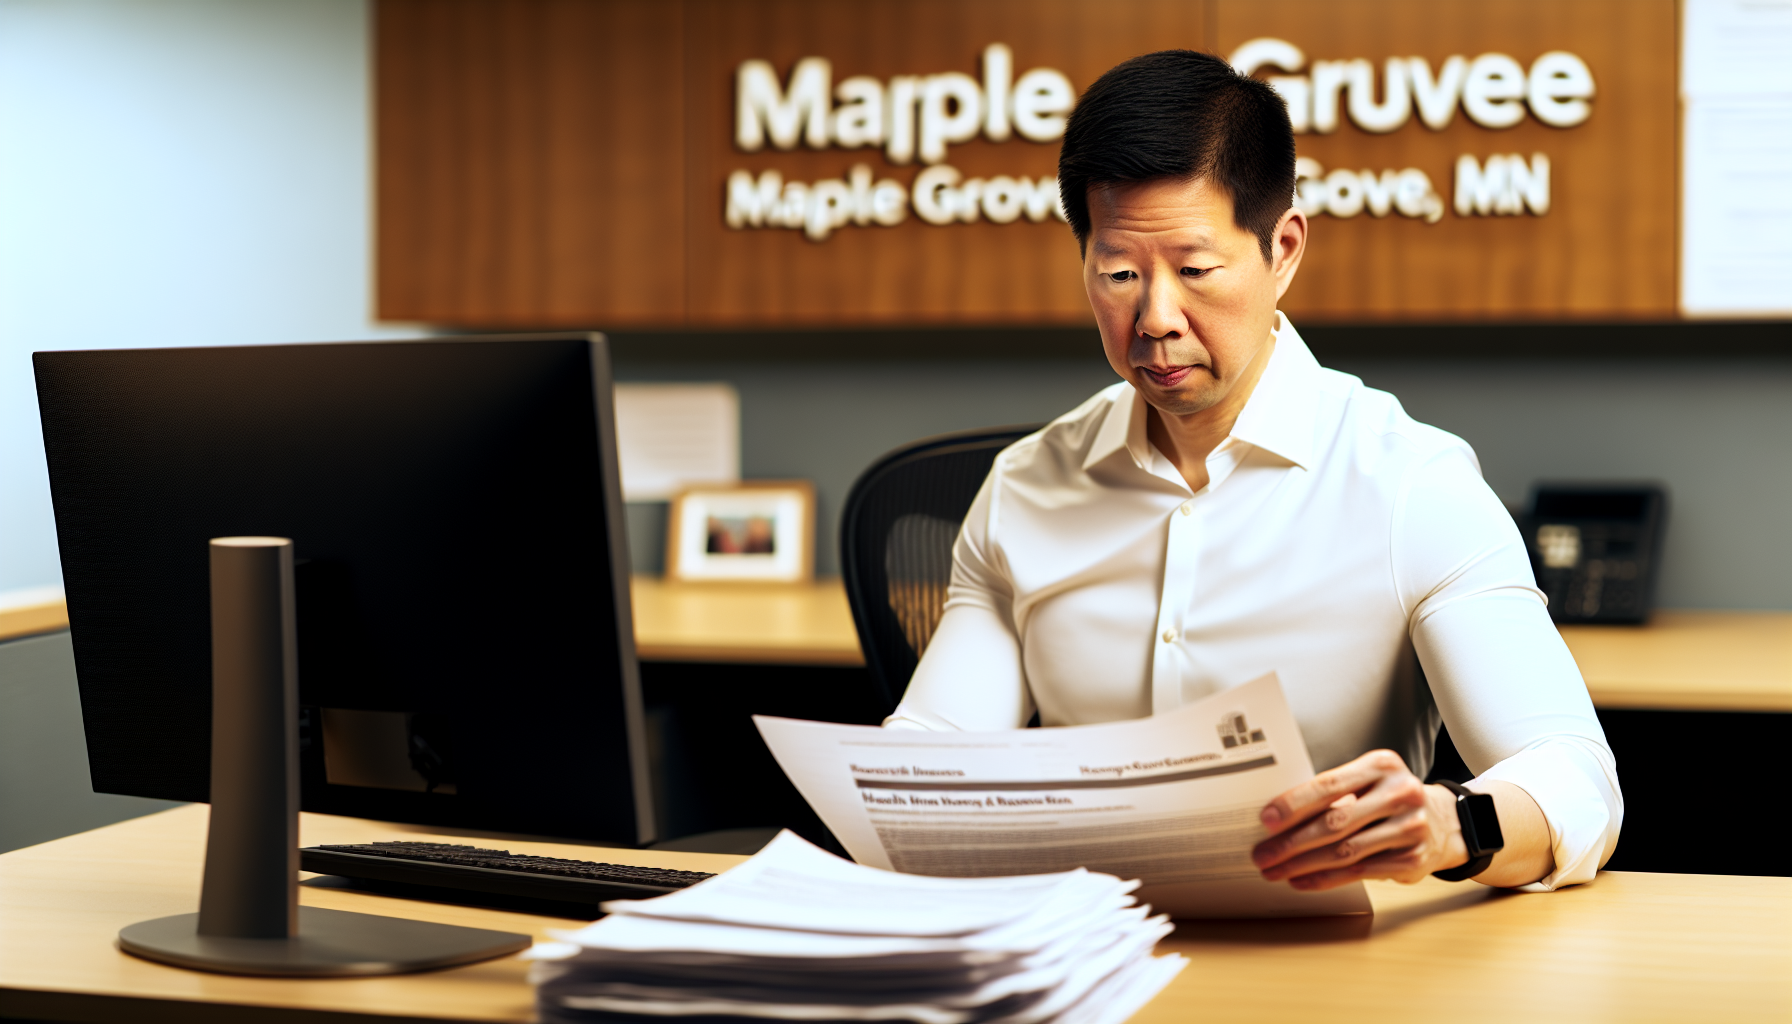 Employee security through health insurance and retirement plans in Maple Grove, MN